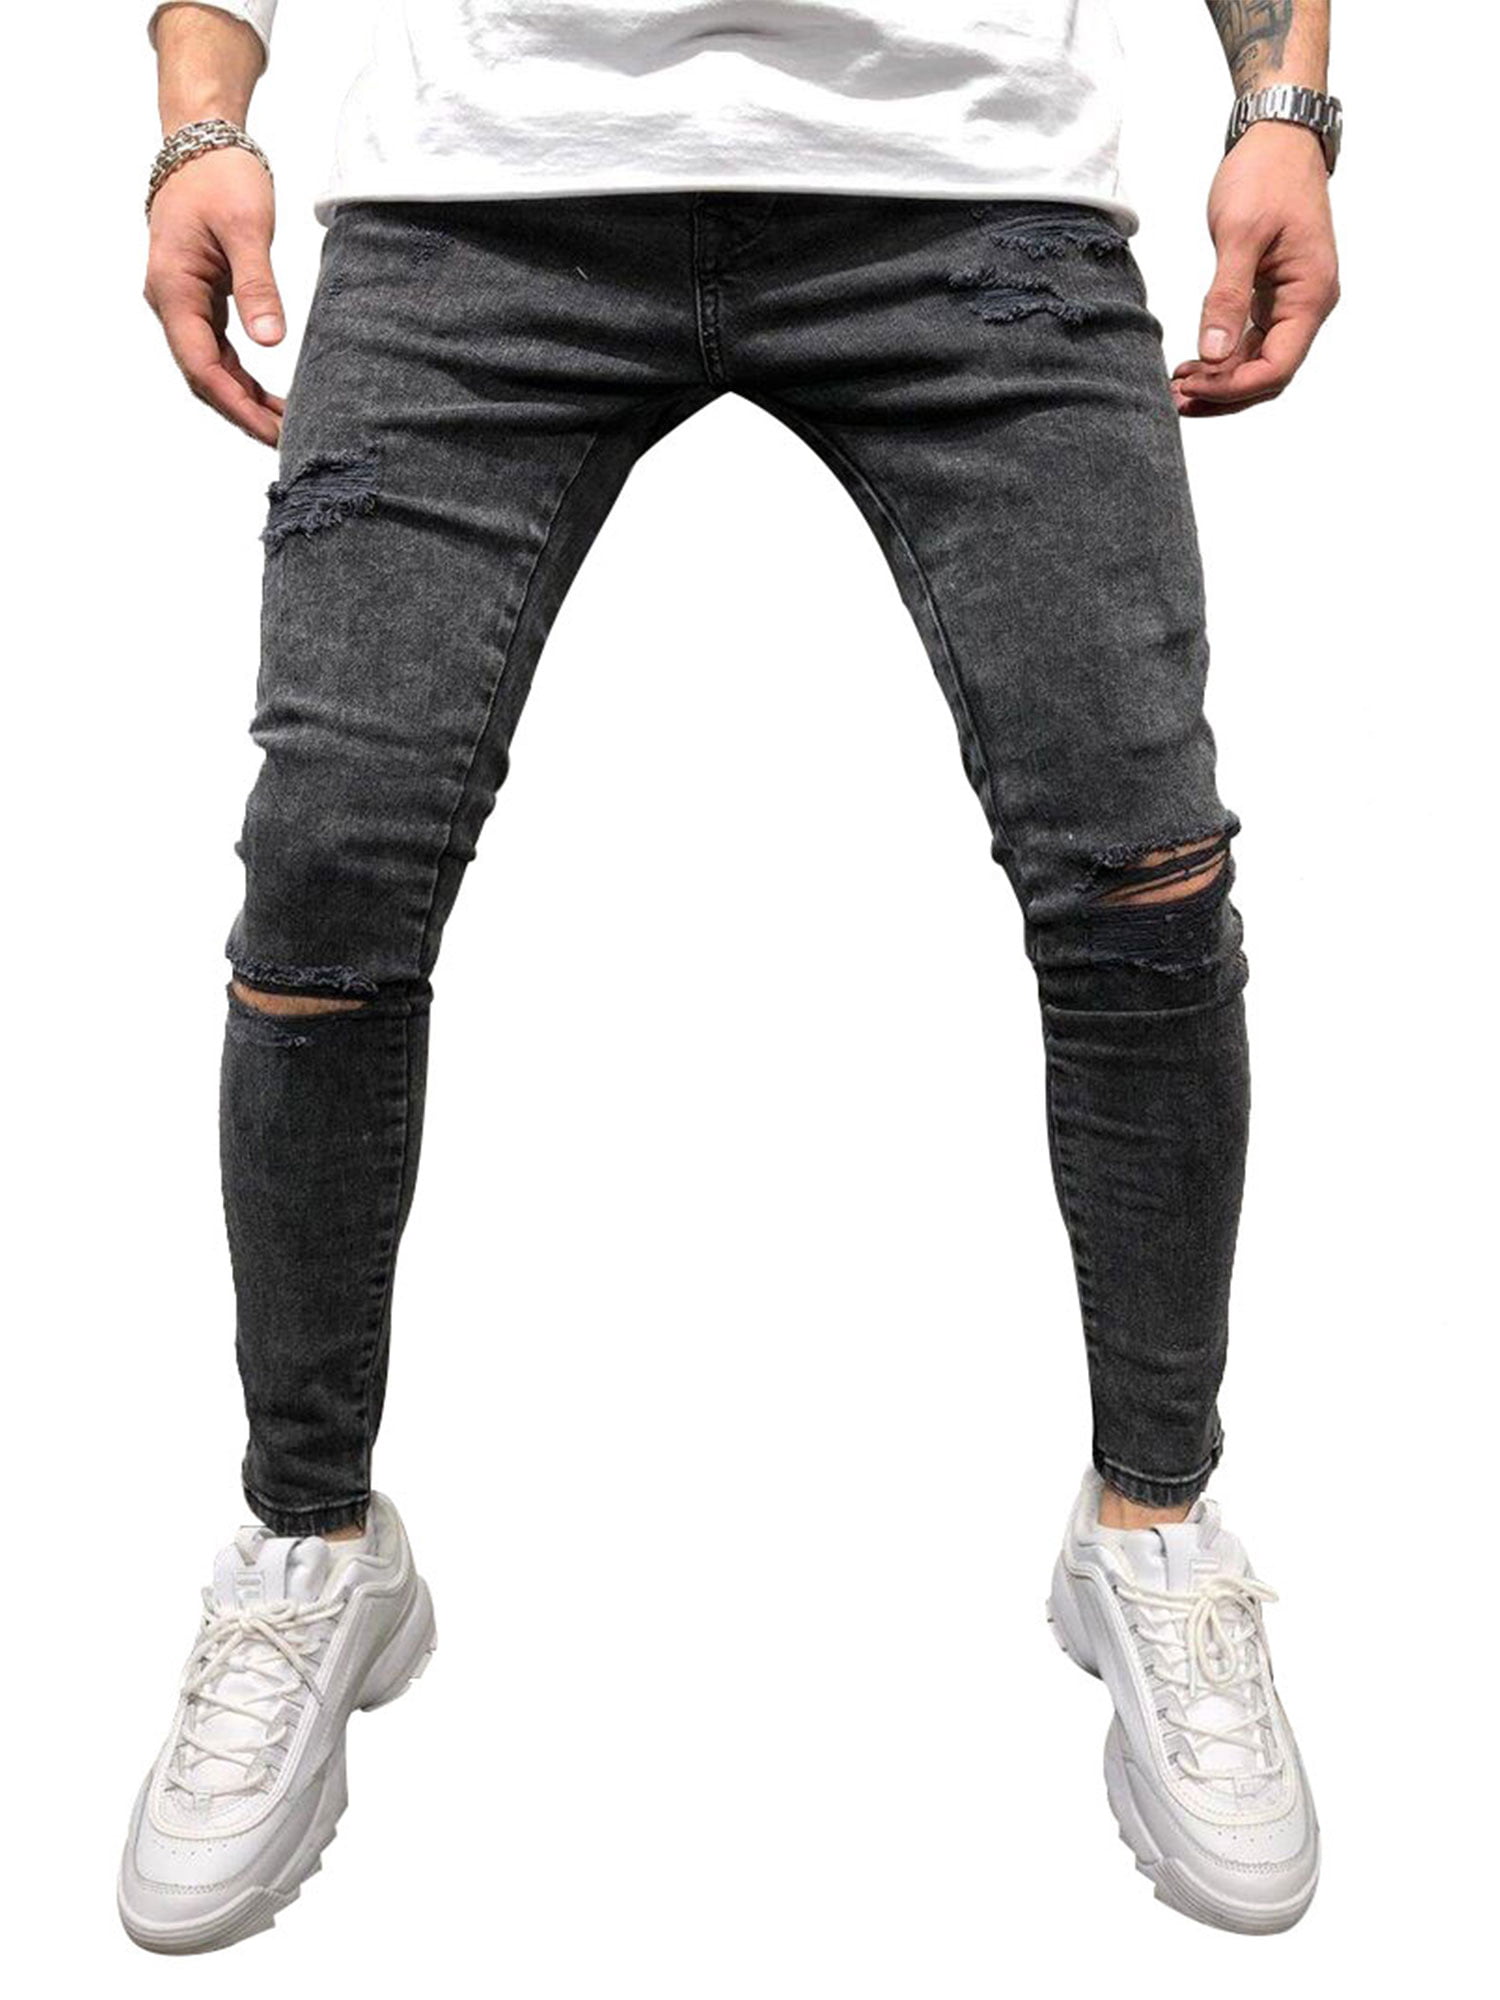 Men's Printed Jeans Street Wear Destroyed Distressed Stylish Slim Fit Denim Pants Casual Skinny Stretch Jean Trousers 34,Navy Blue 